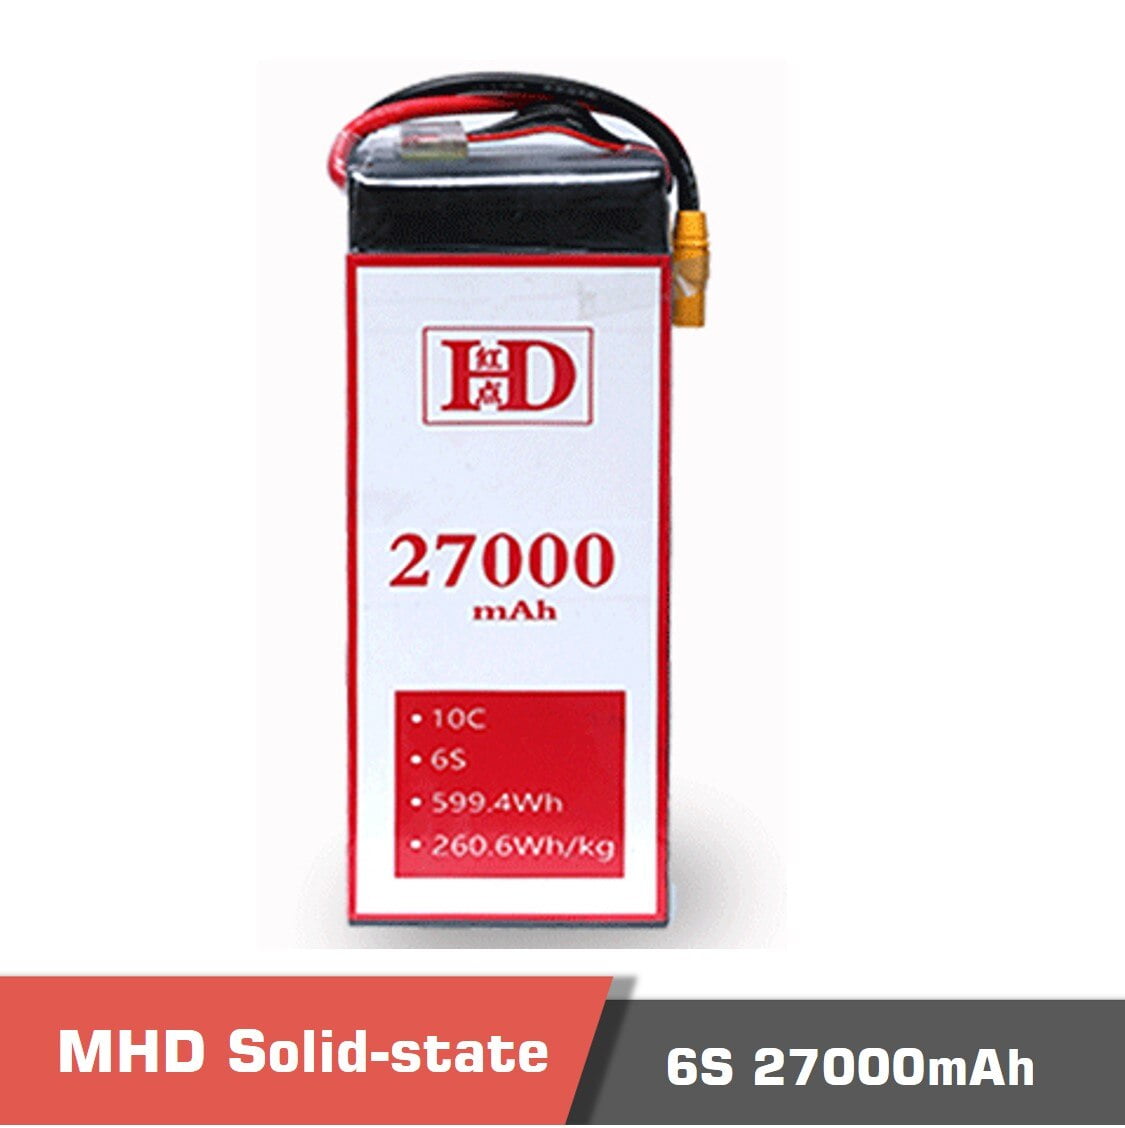 MHD battery, New Technology Solid-state Li-ion Battery 27000mAh 6s 10c